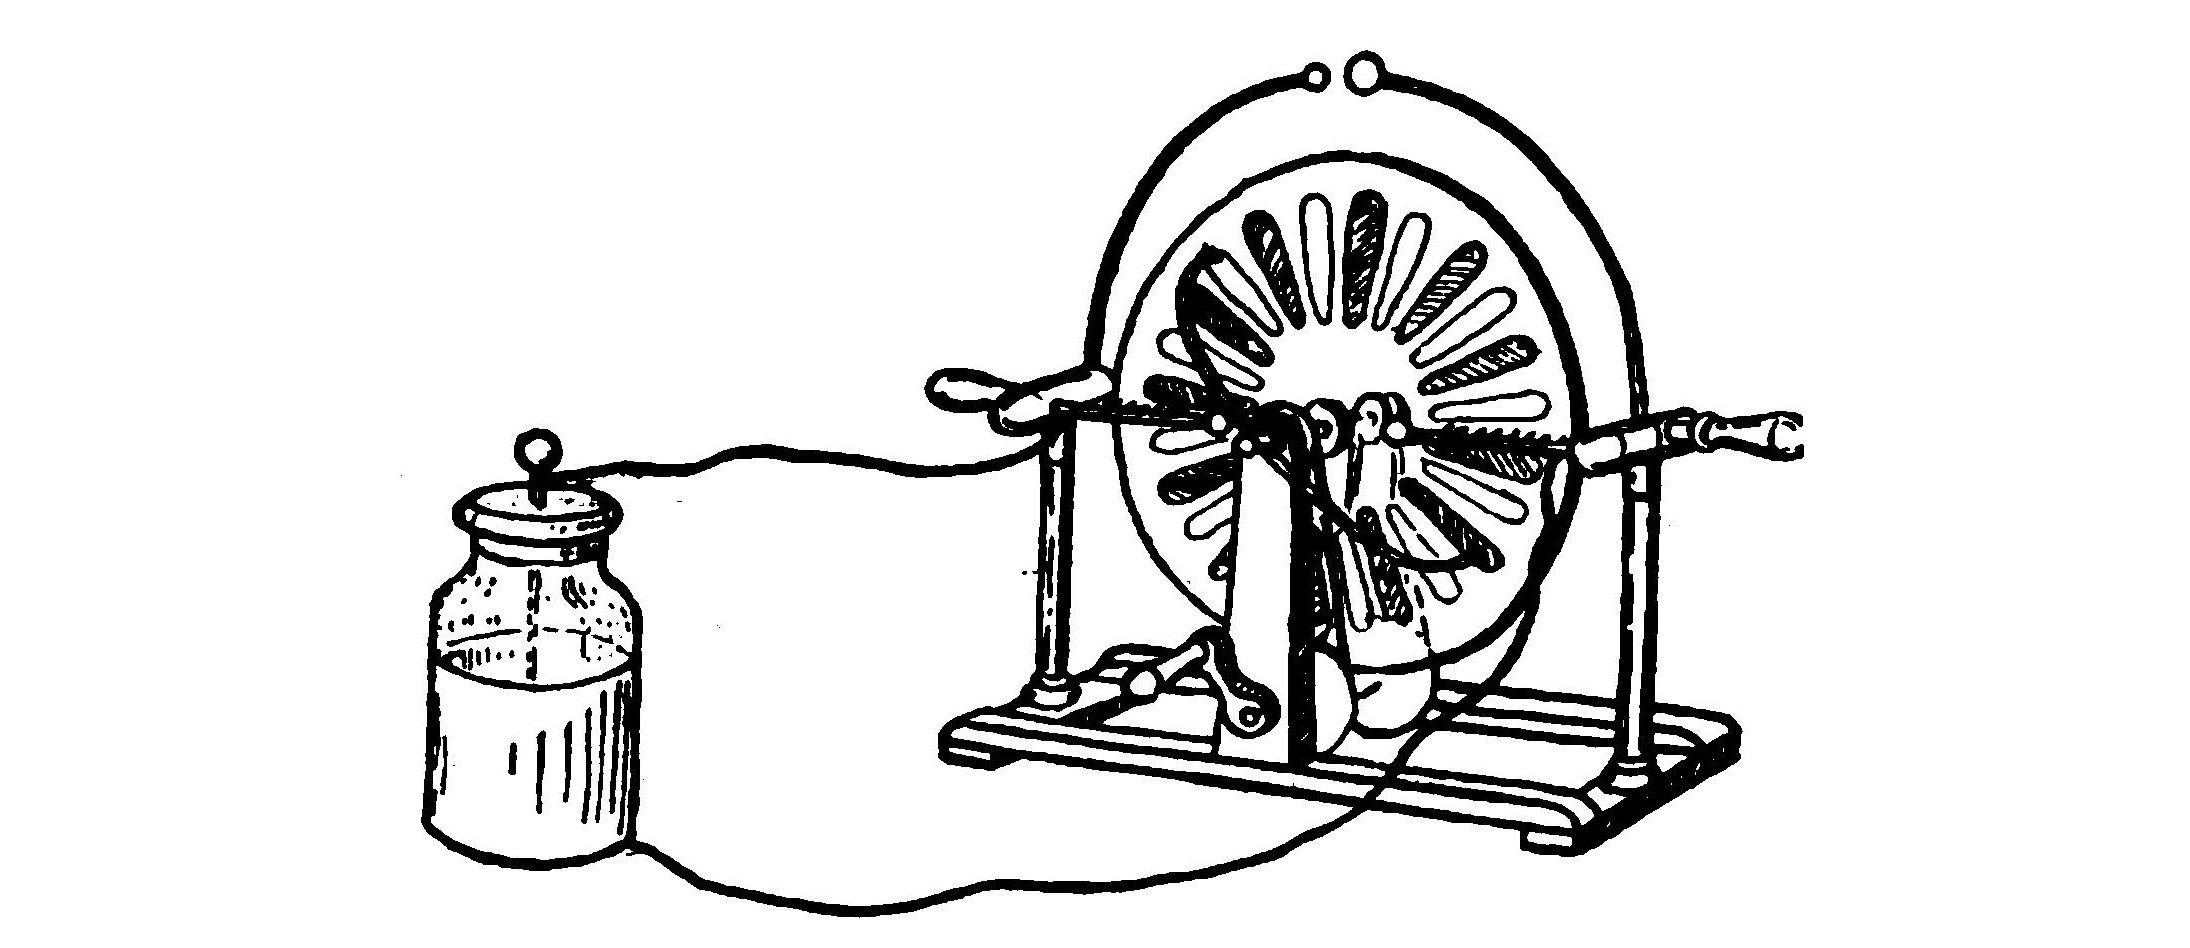 FIG. 3.—A static machine connected to a Leyden jar.